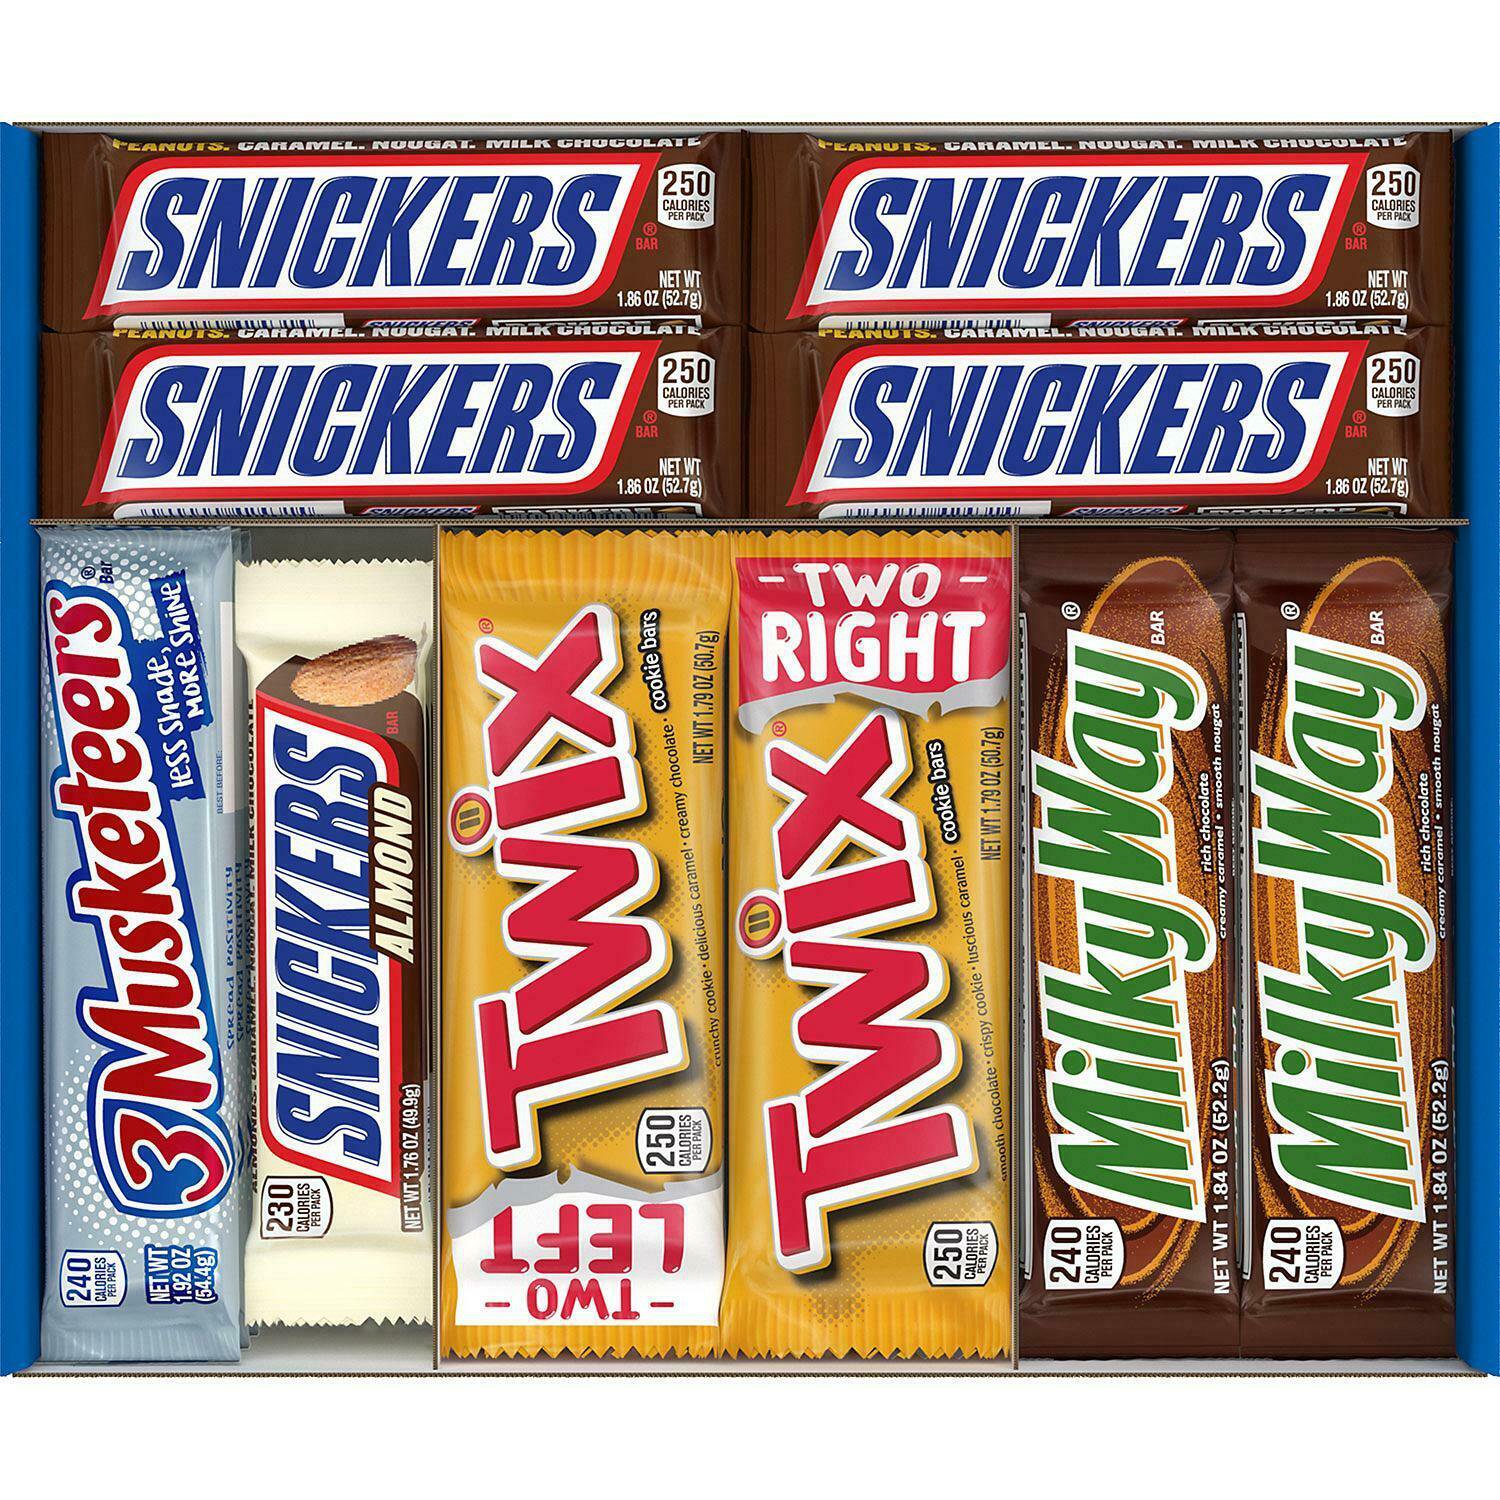 Mars Full Size Candy Bars Snickers Almond Twix 3 Musketeers Variety